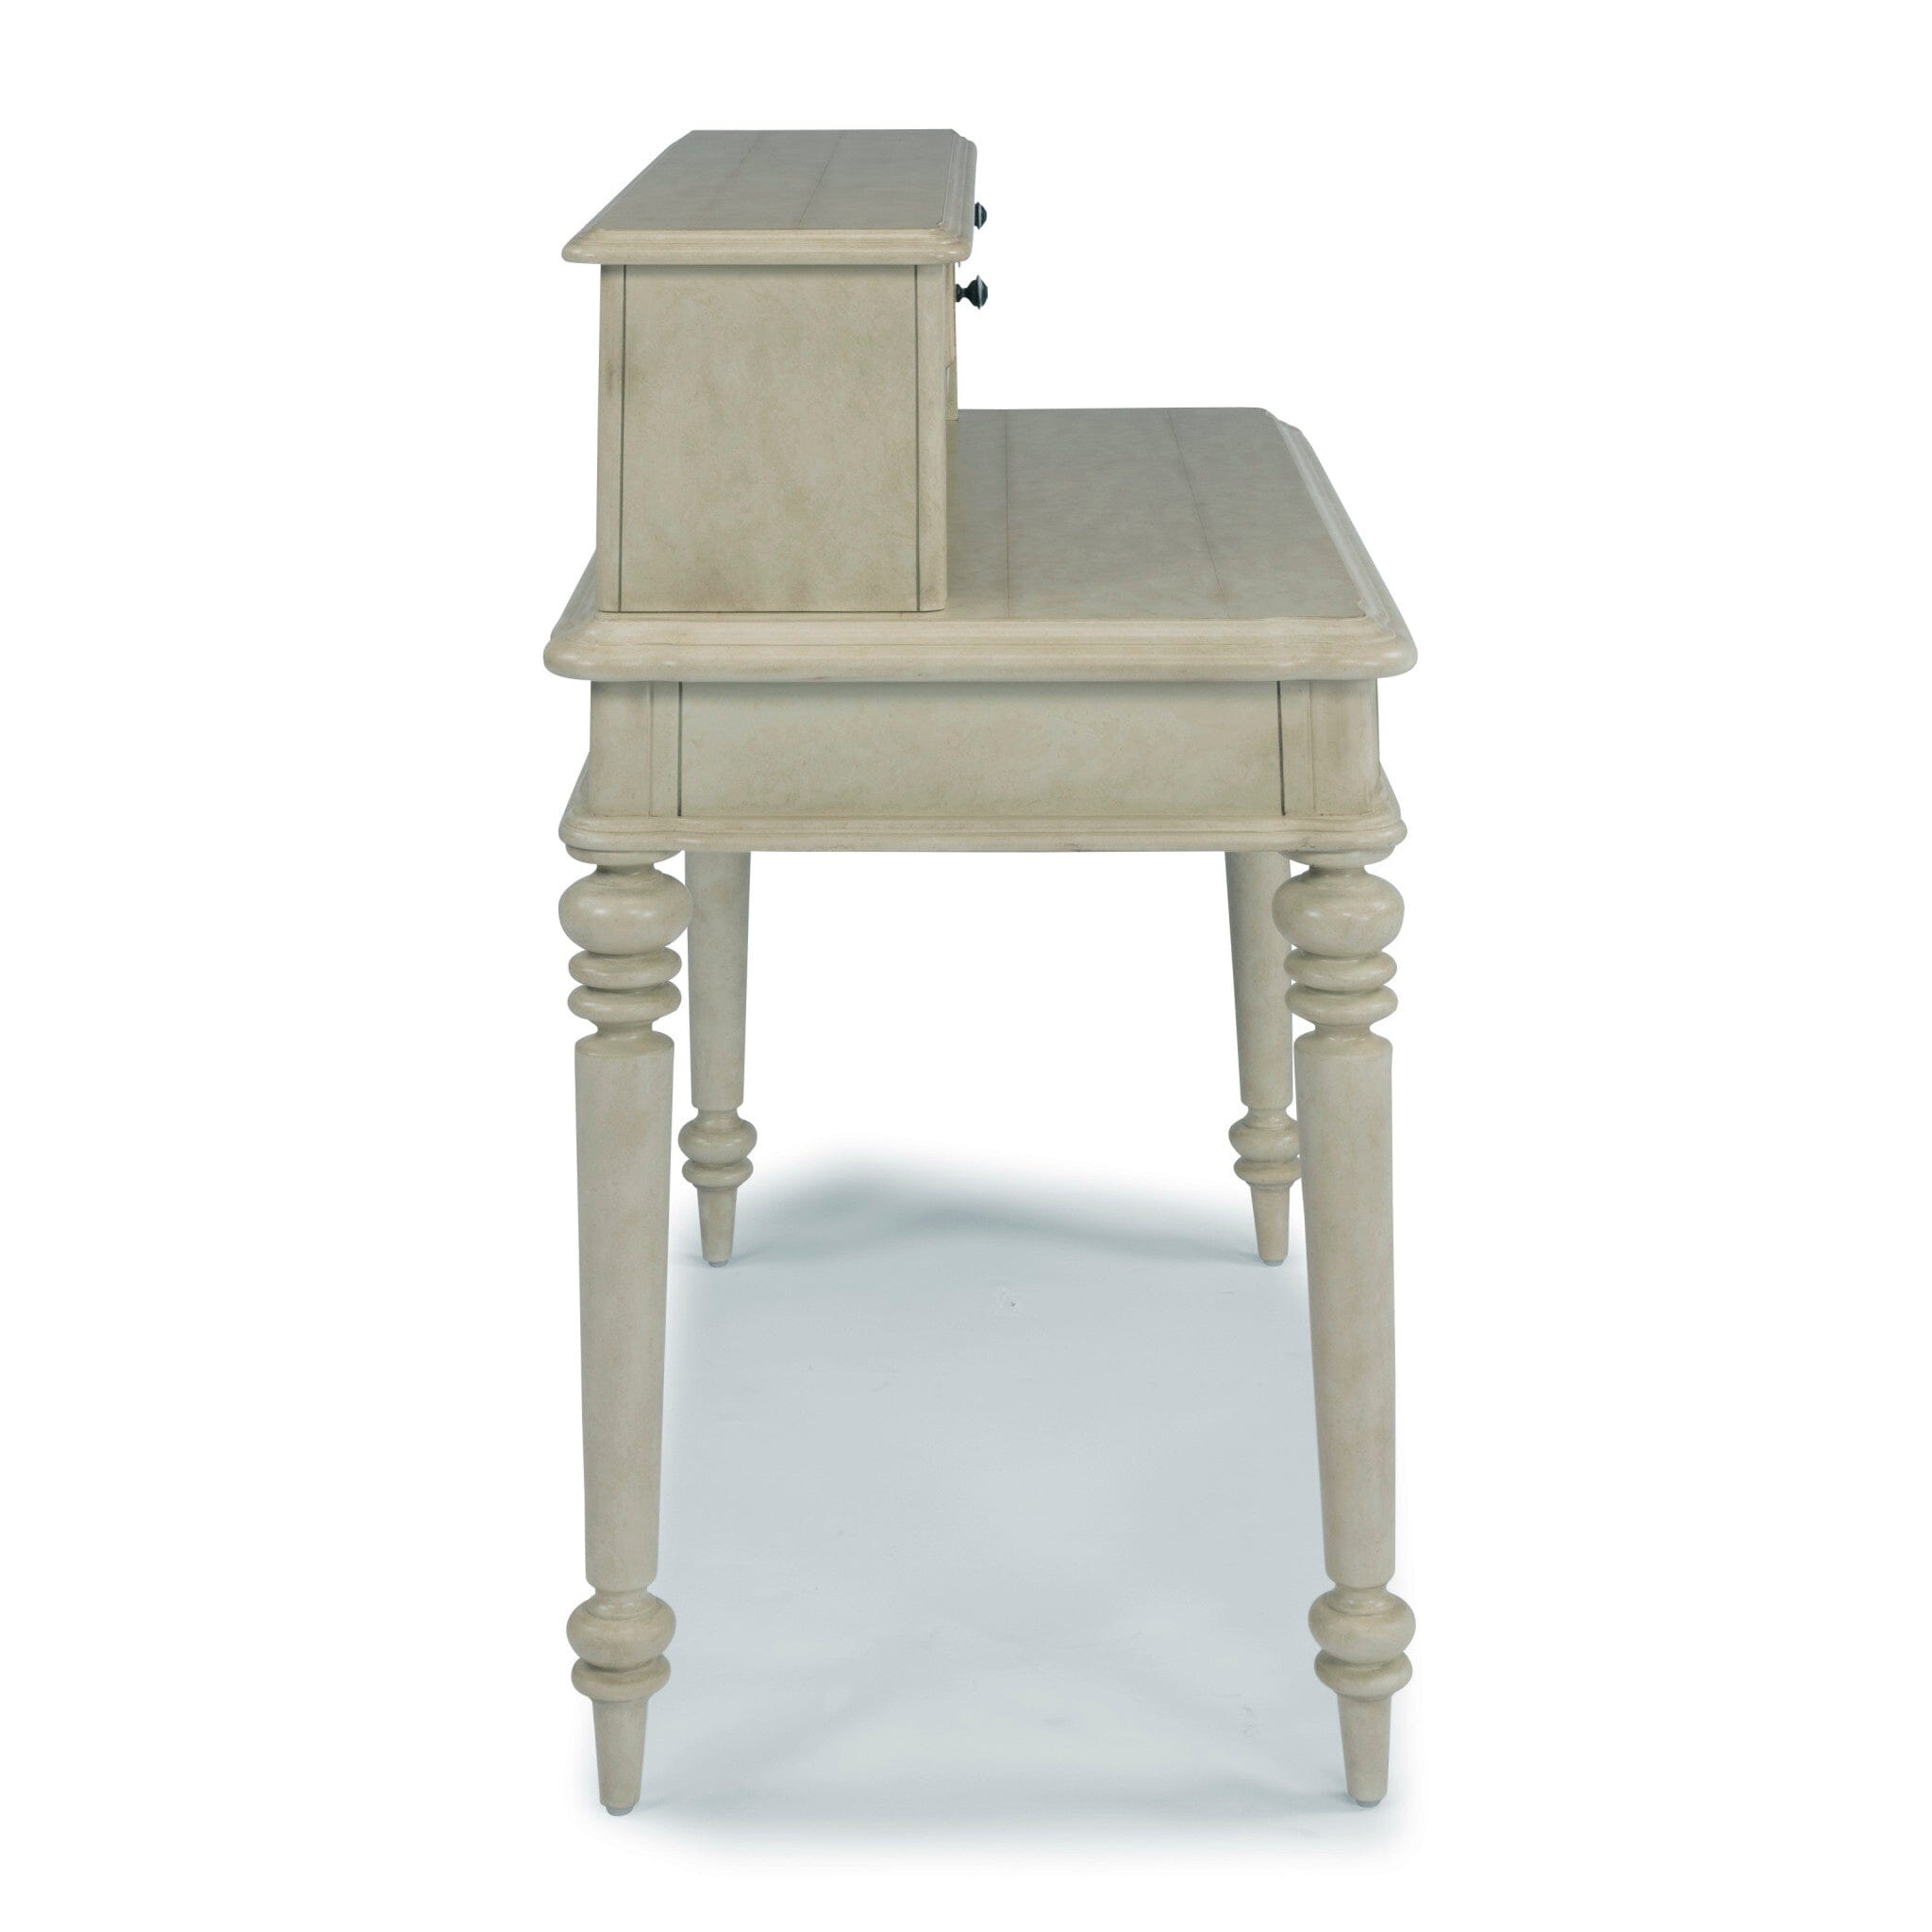 Rustic Farmhouse Desk with Hutch By Provence Desk Provence